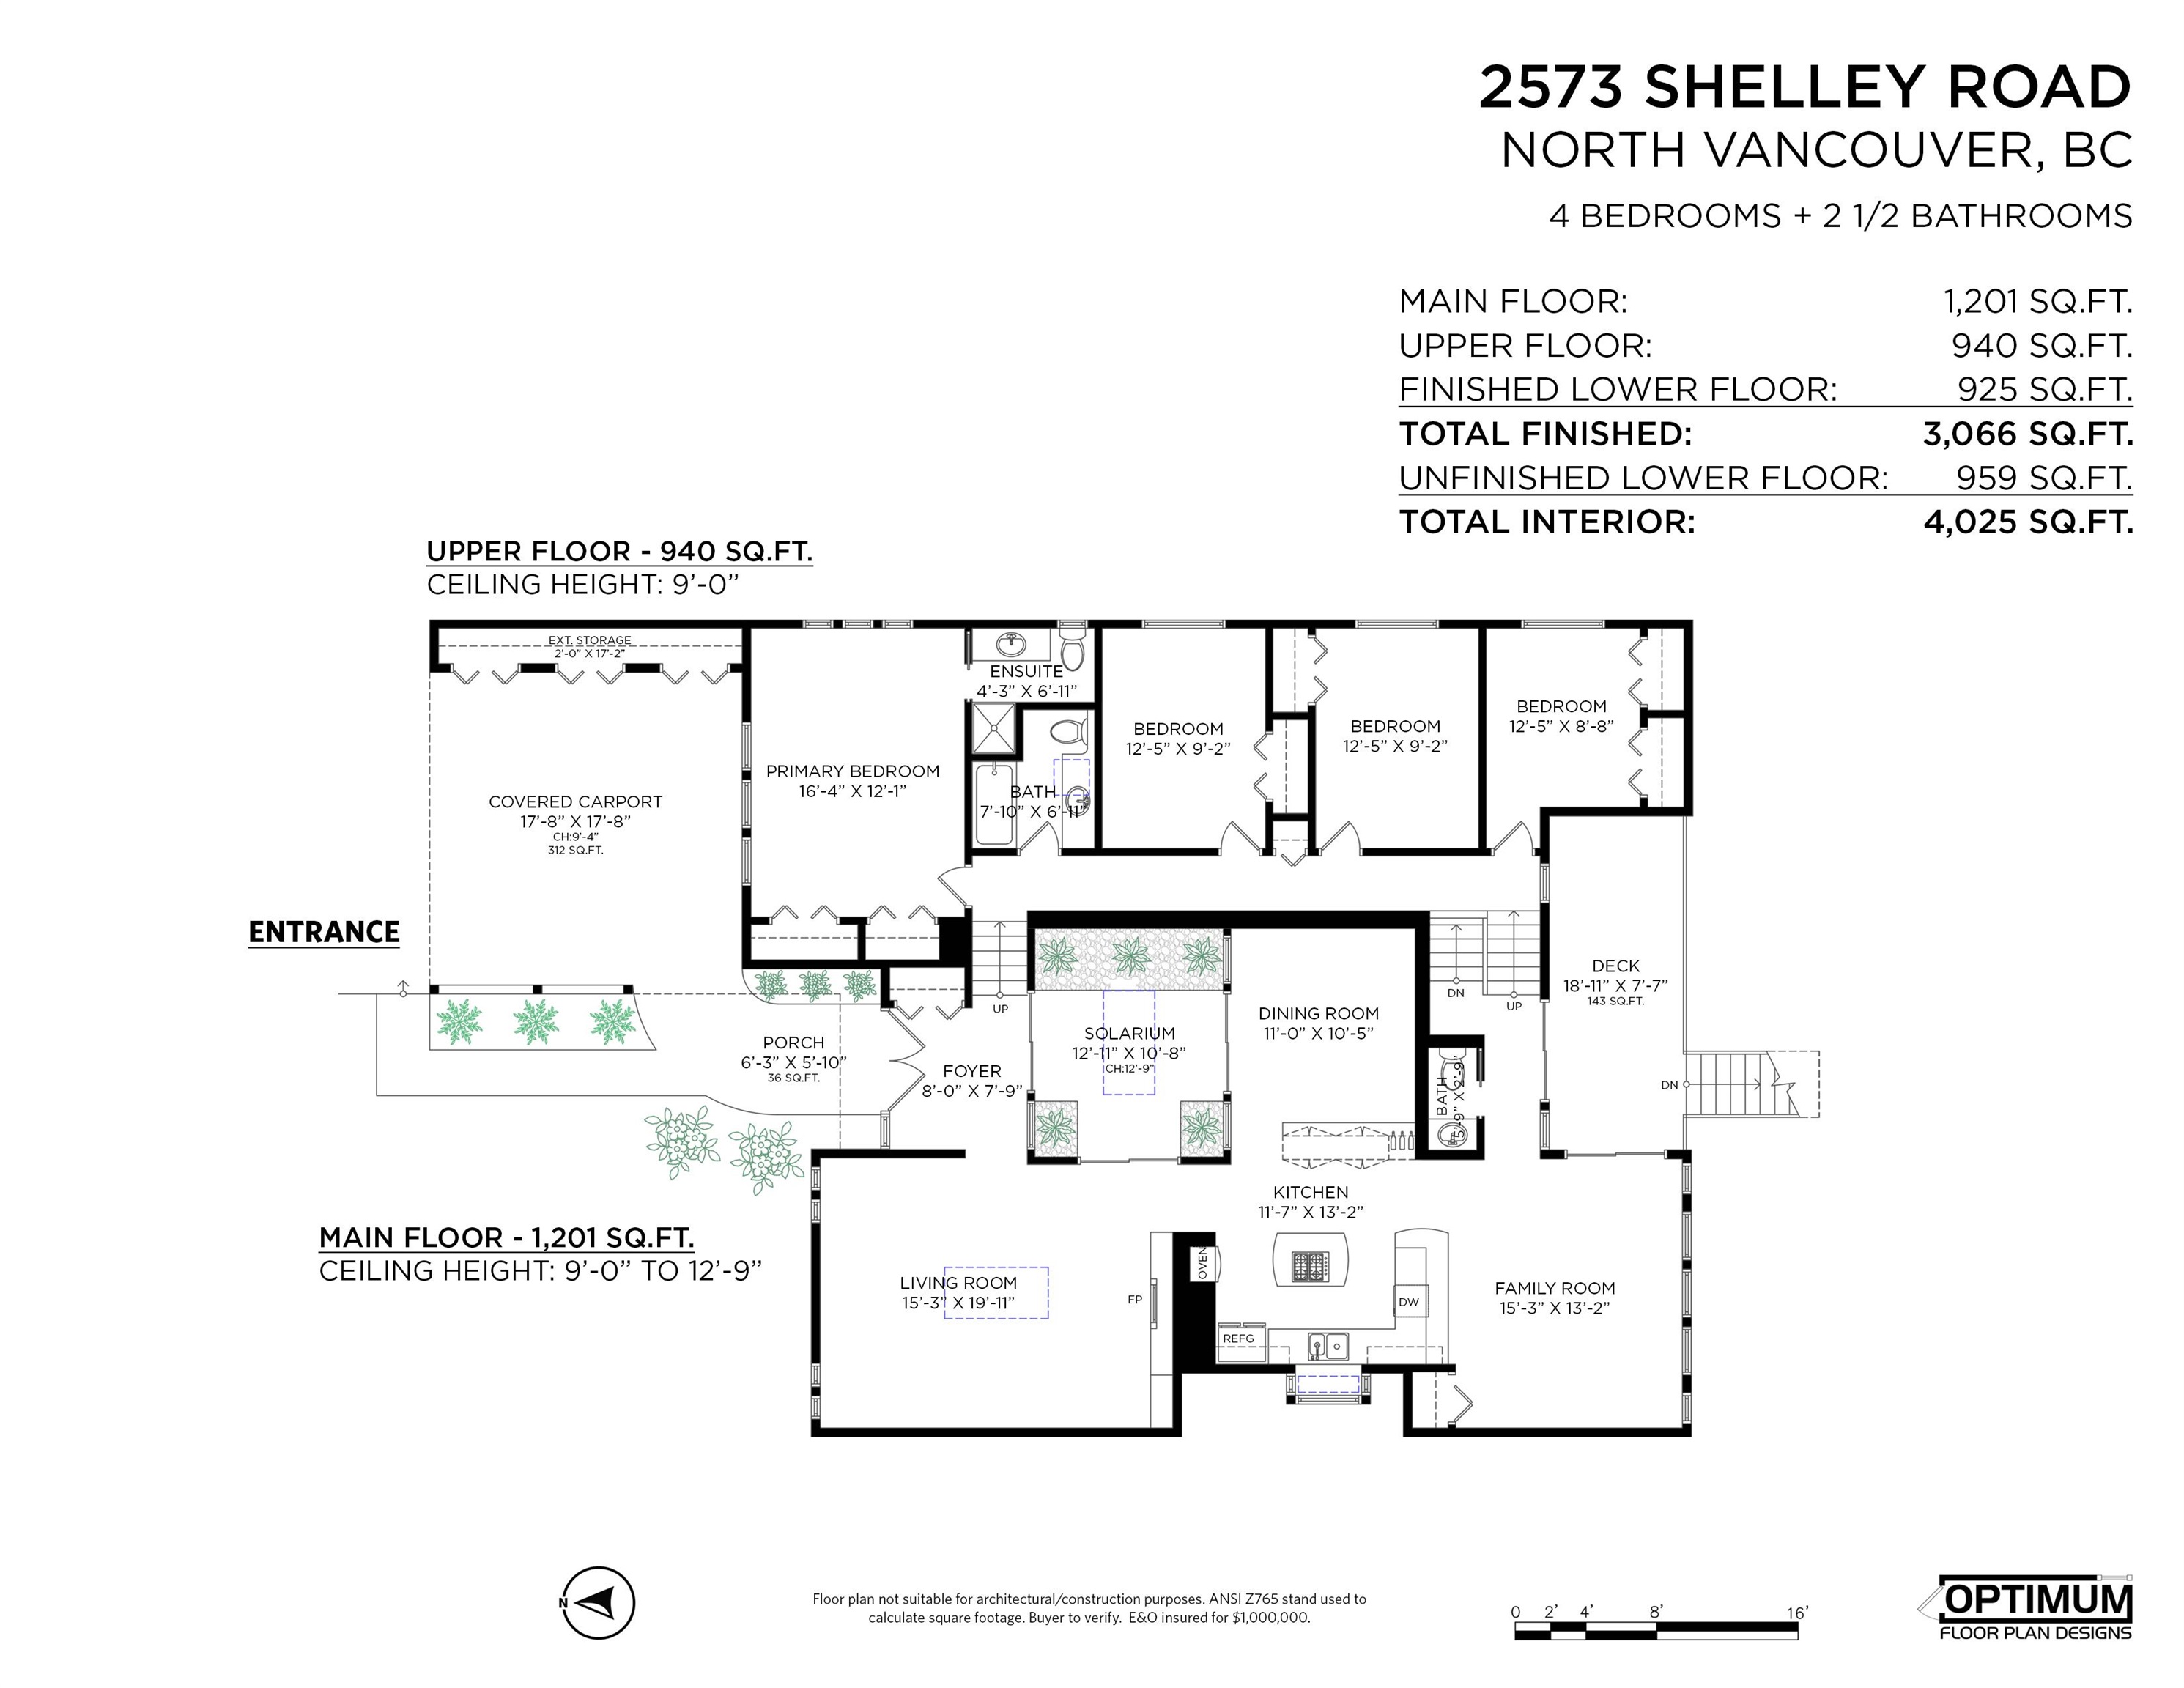 Listing image of 2573 SHELLEY ROAD